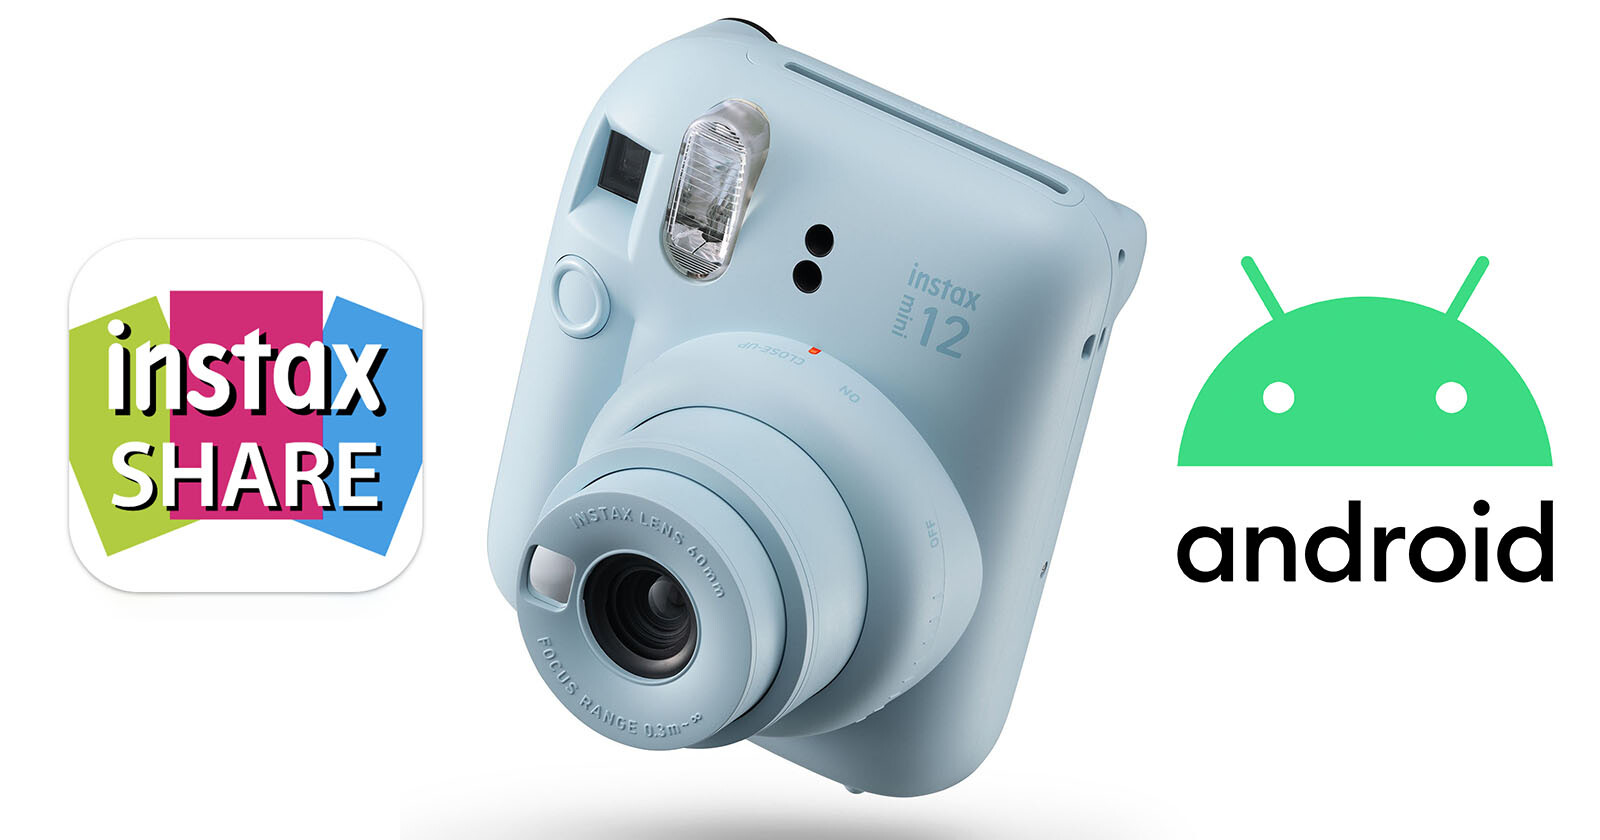 Fujifilm Advises Users Not to Update the Instax Share App on Android